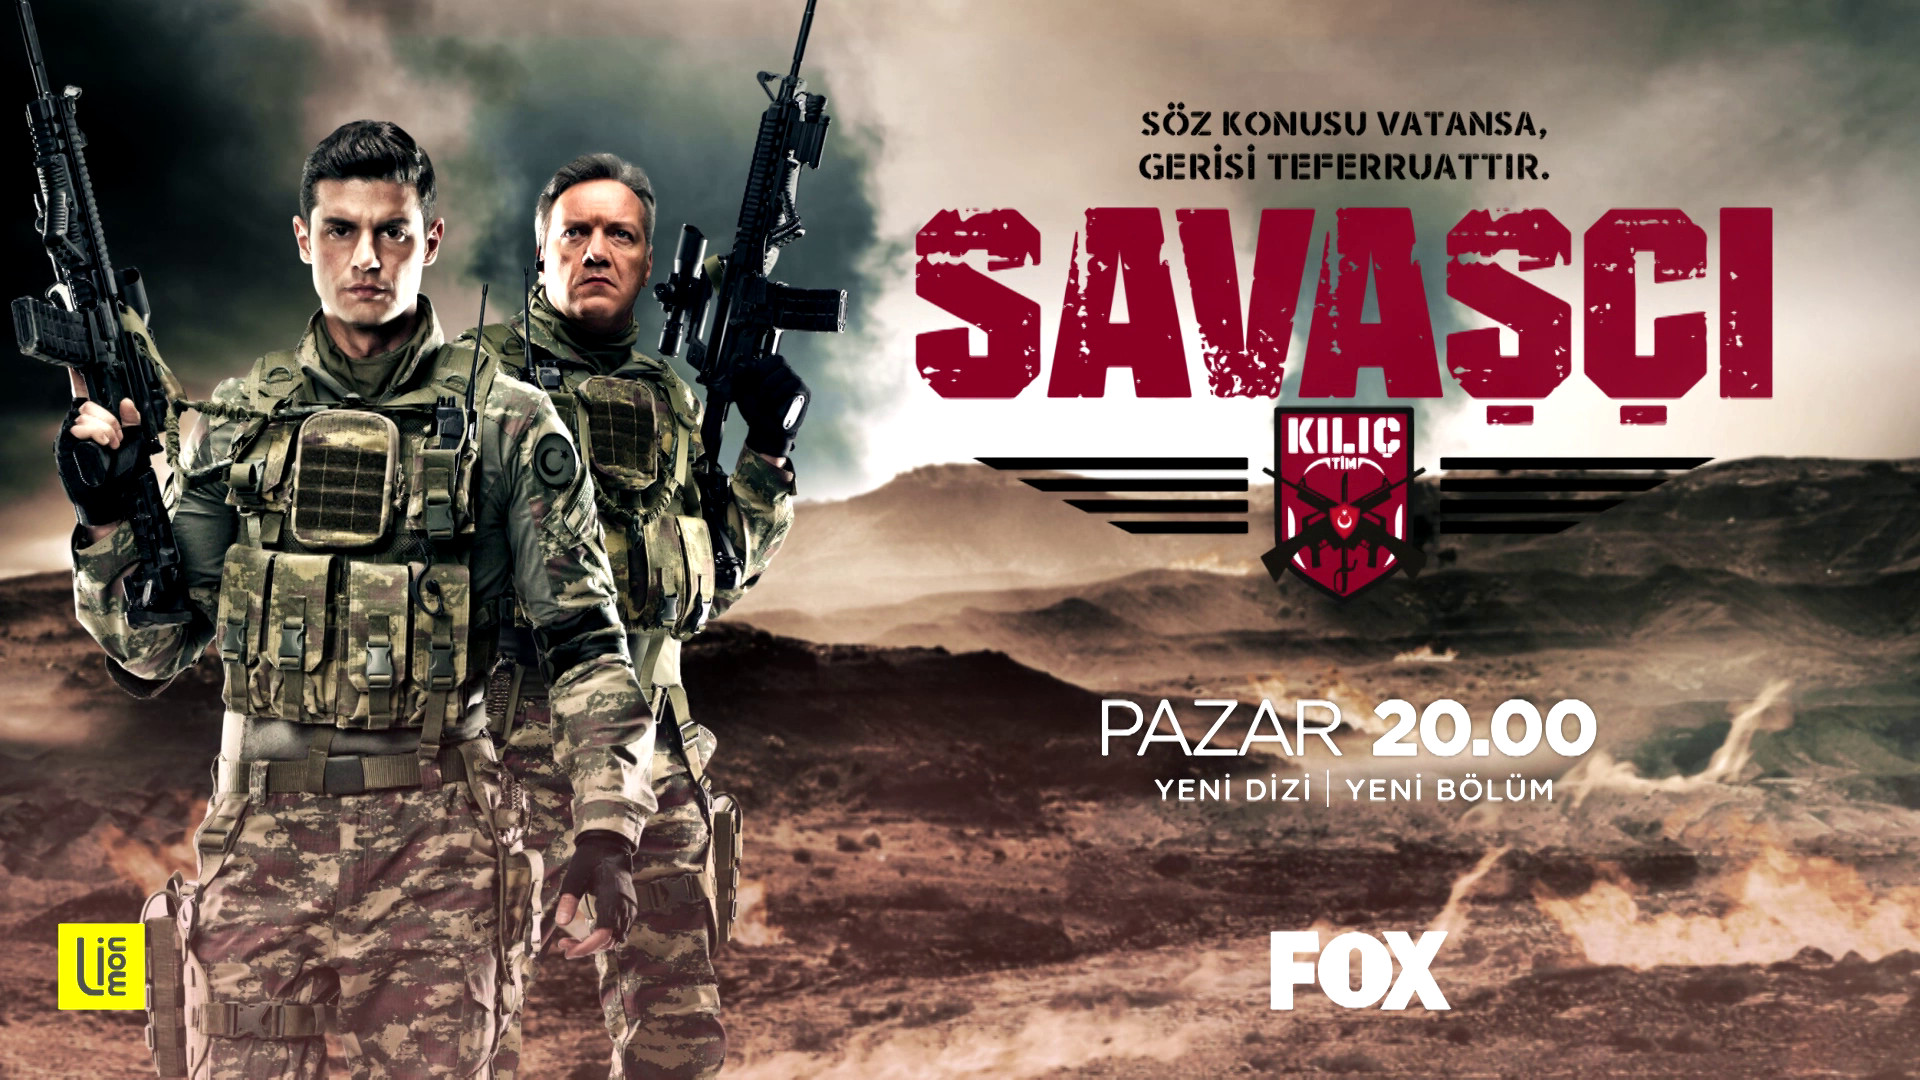 There seems to be a bit of a misunderstanding. "Savasci" (The Warrior) isn't a movie, it's actually a Turkish TV series that will be shown on FOX TV. It's being produced by Limon Film and Hayri Aslan. Here We Present Turkish Drama The Warrior Cast, Story, and Release Date.